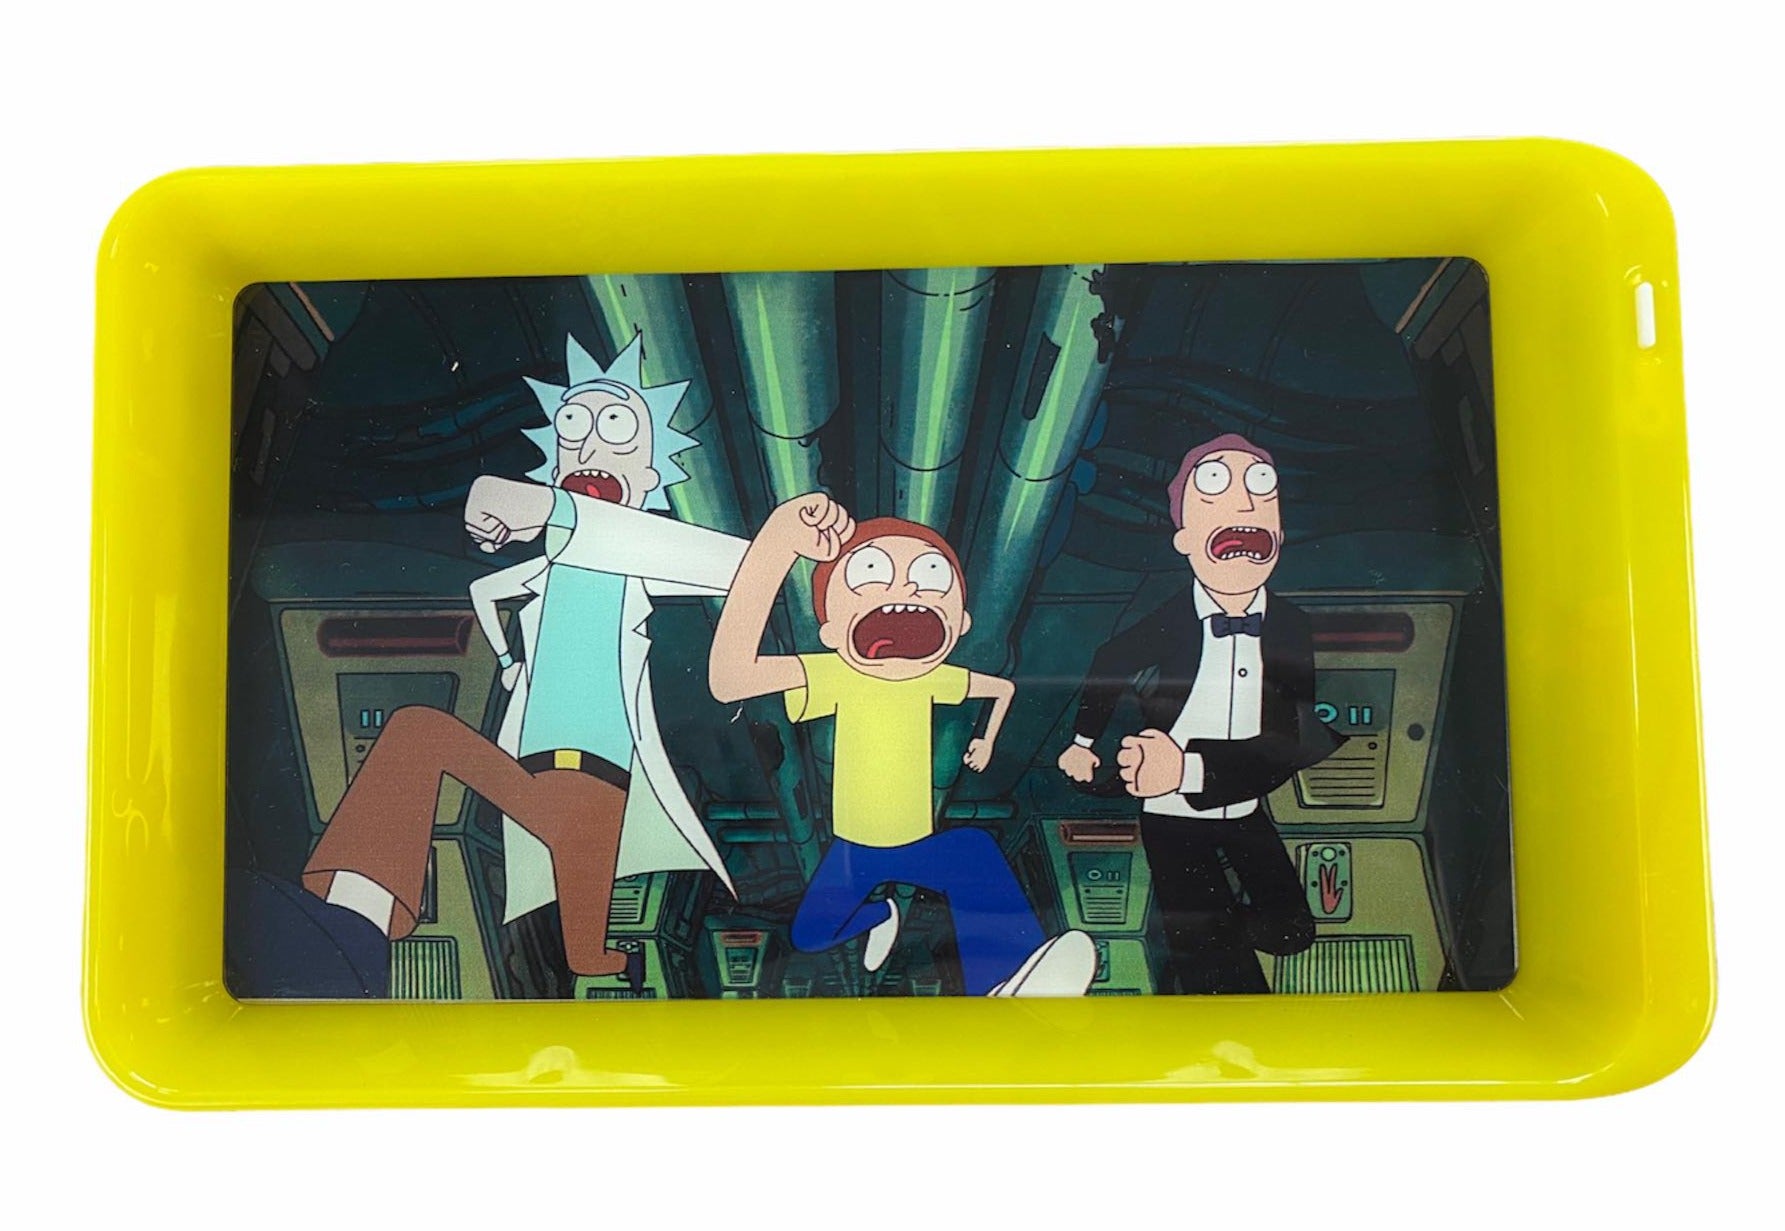 Rick and Morty Rolling Tray